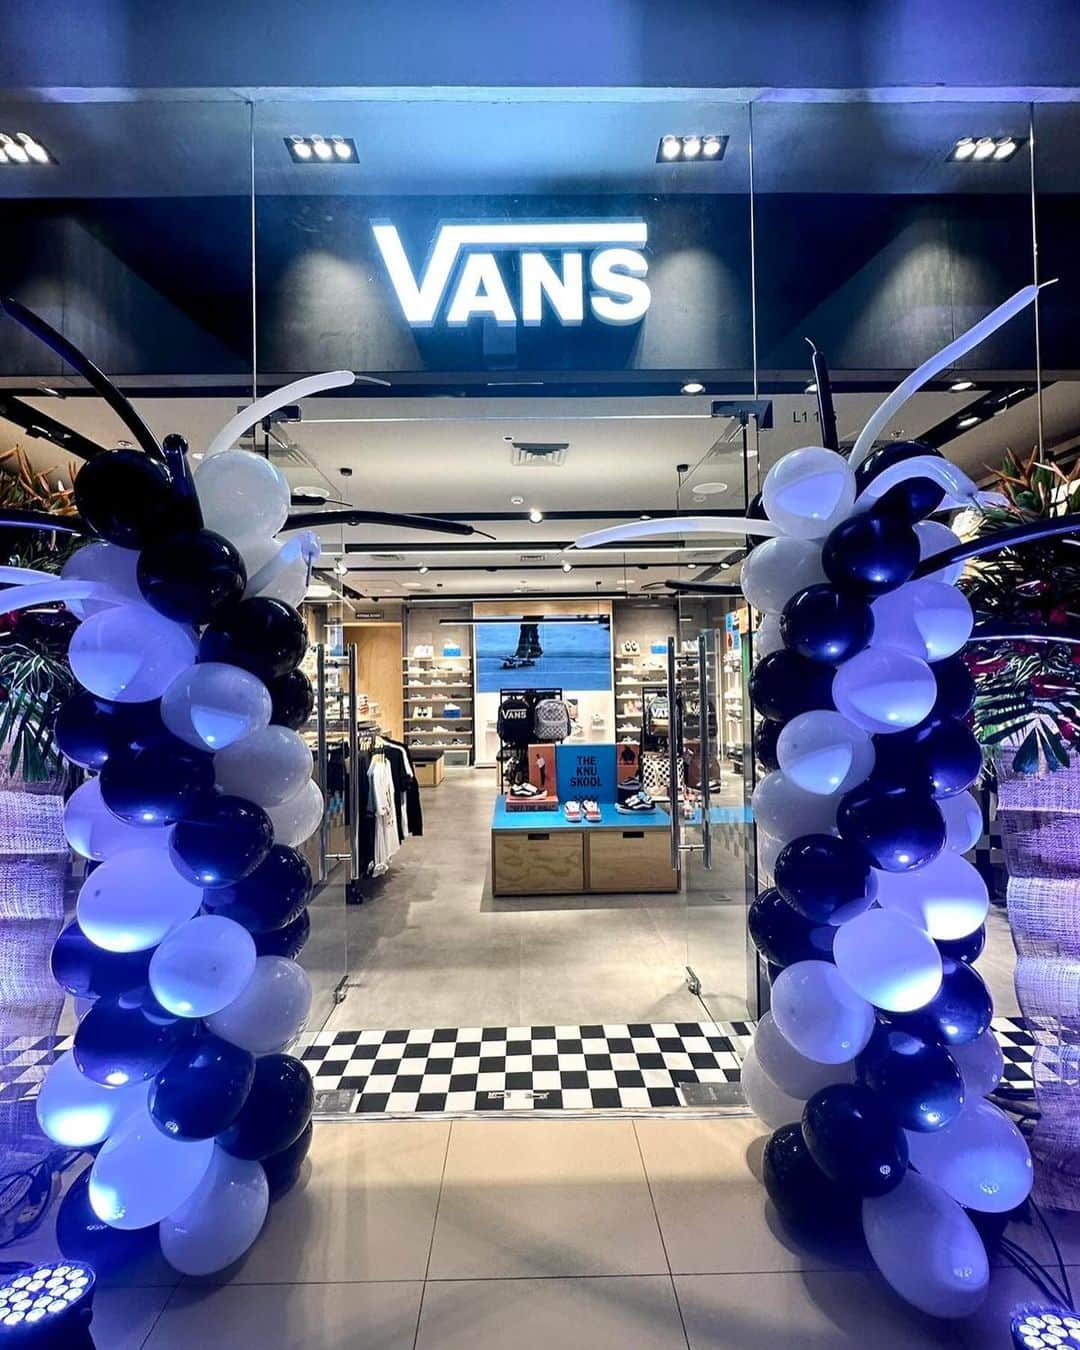 Vans Philippinesのインスタグラム：「📣 𝐇𝐞𝐚𝐝𝐬 𝐔𝐩, 𝐒𝐭𝐫𝐞𝐞𝐭 𝐂𝐫𝐮𝐢𝐬𝐞𝐫𝐬!   𝐖𝐞'𝐫𝐞 𝐍𝐎𝐖 𝐎𝐏𝐄𝐍!  Swing on down to our new and stylishly remodeled spot at Market Market. Take your board for a spin and drop by the Ground Floor, Serendra Wing. We're giving away a FREE KNITTED WOVEN BAG to the first 100 folks who make a minimum single-receipt purchase of P8,000.  See you, Fam!  #vansphilippines」